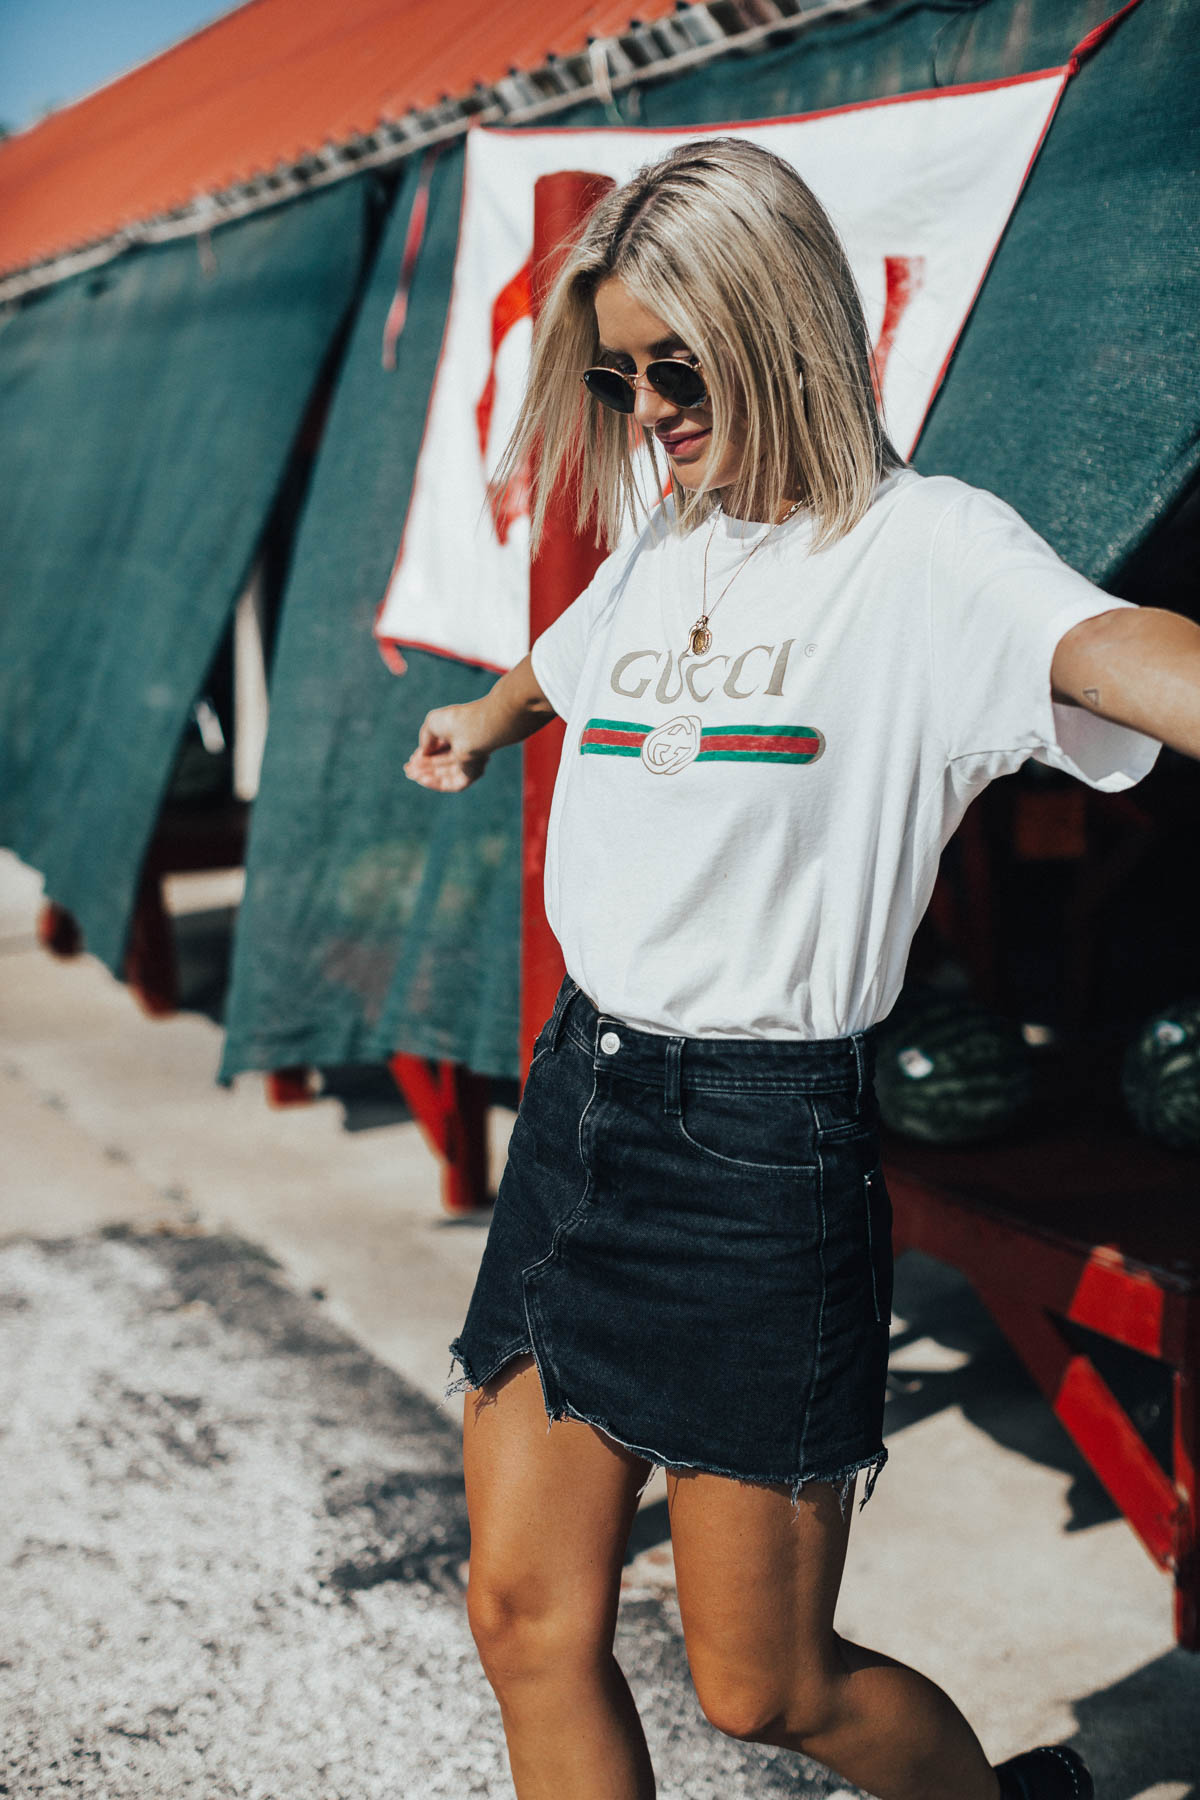 90's inspired look wearing a Gucci logo t-shirt